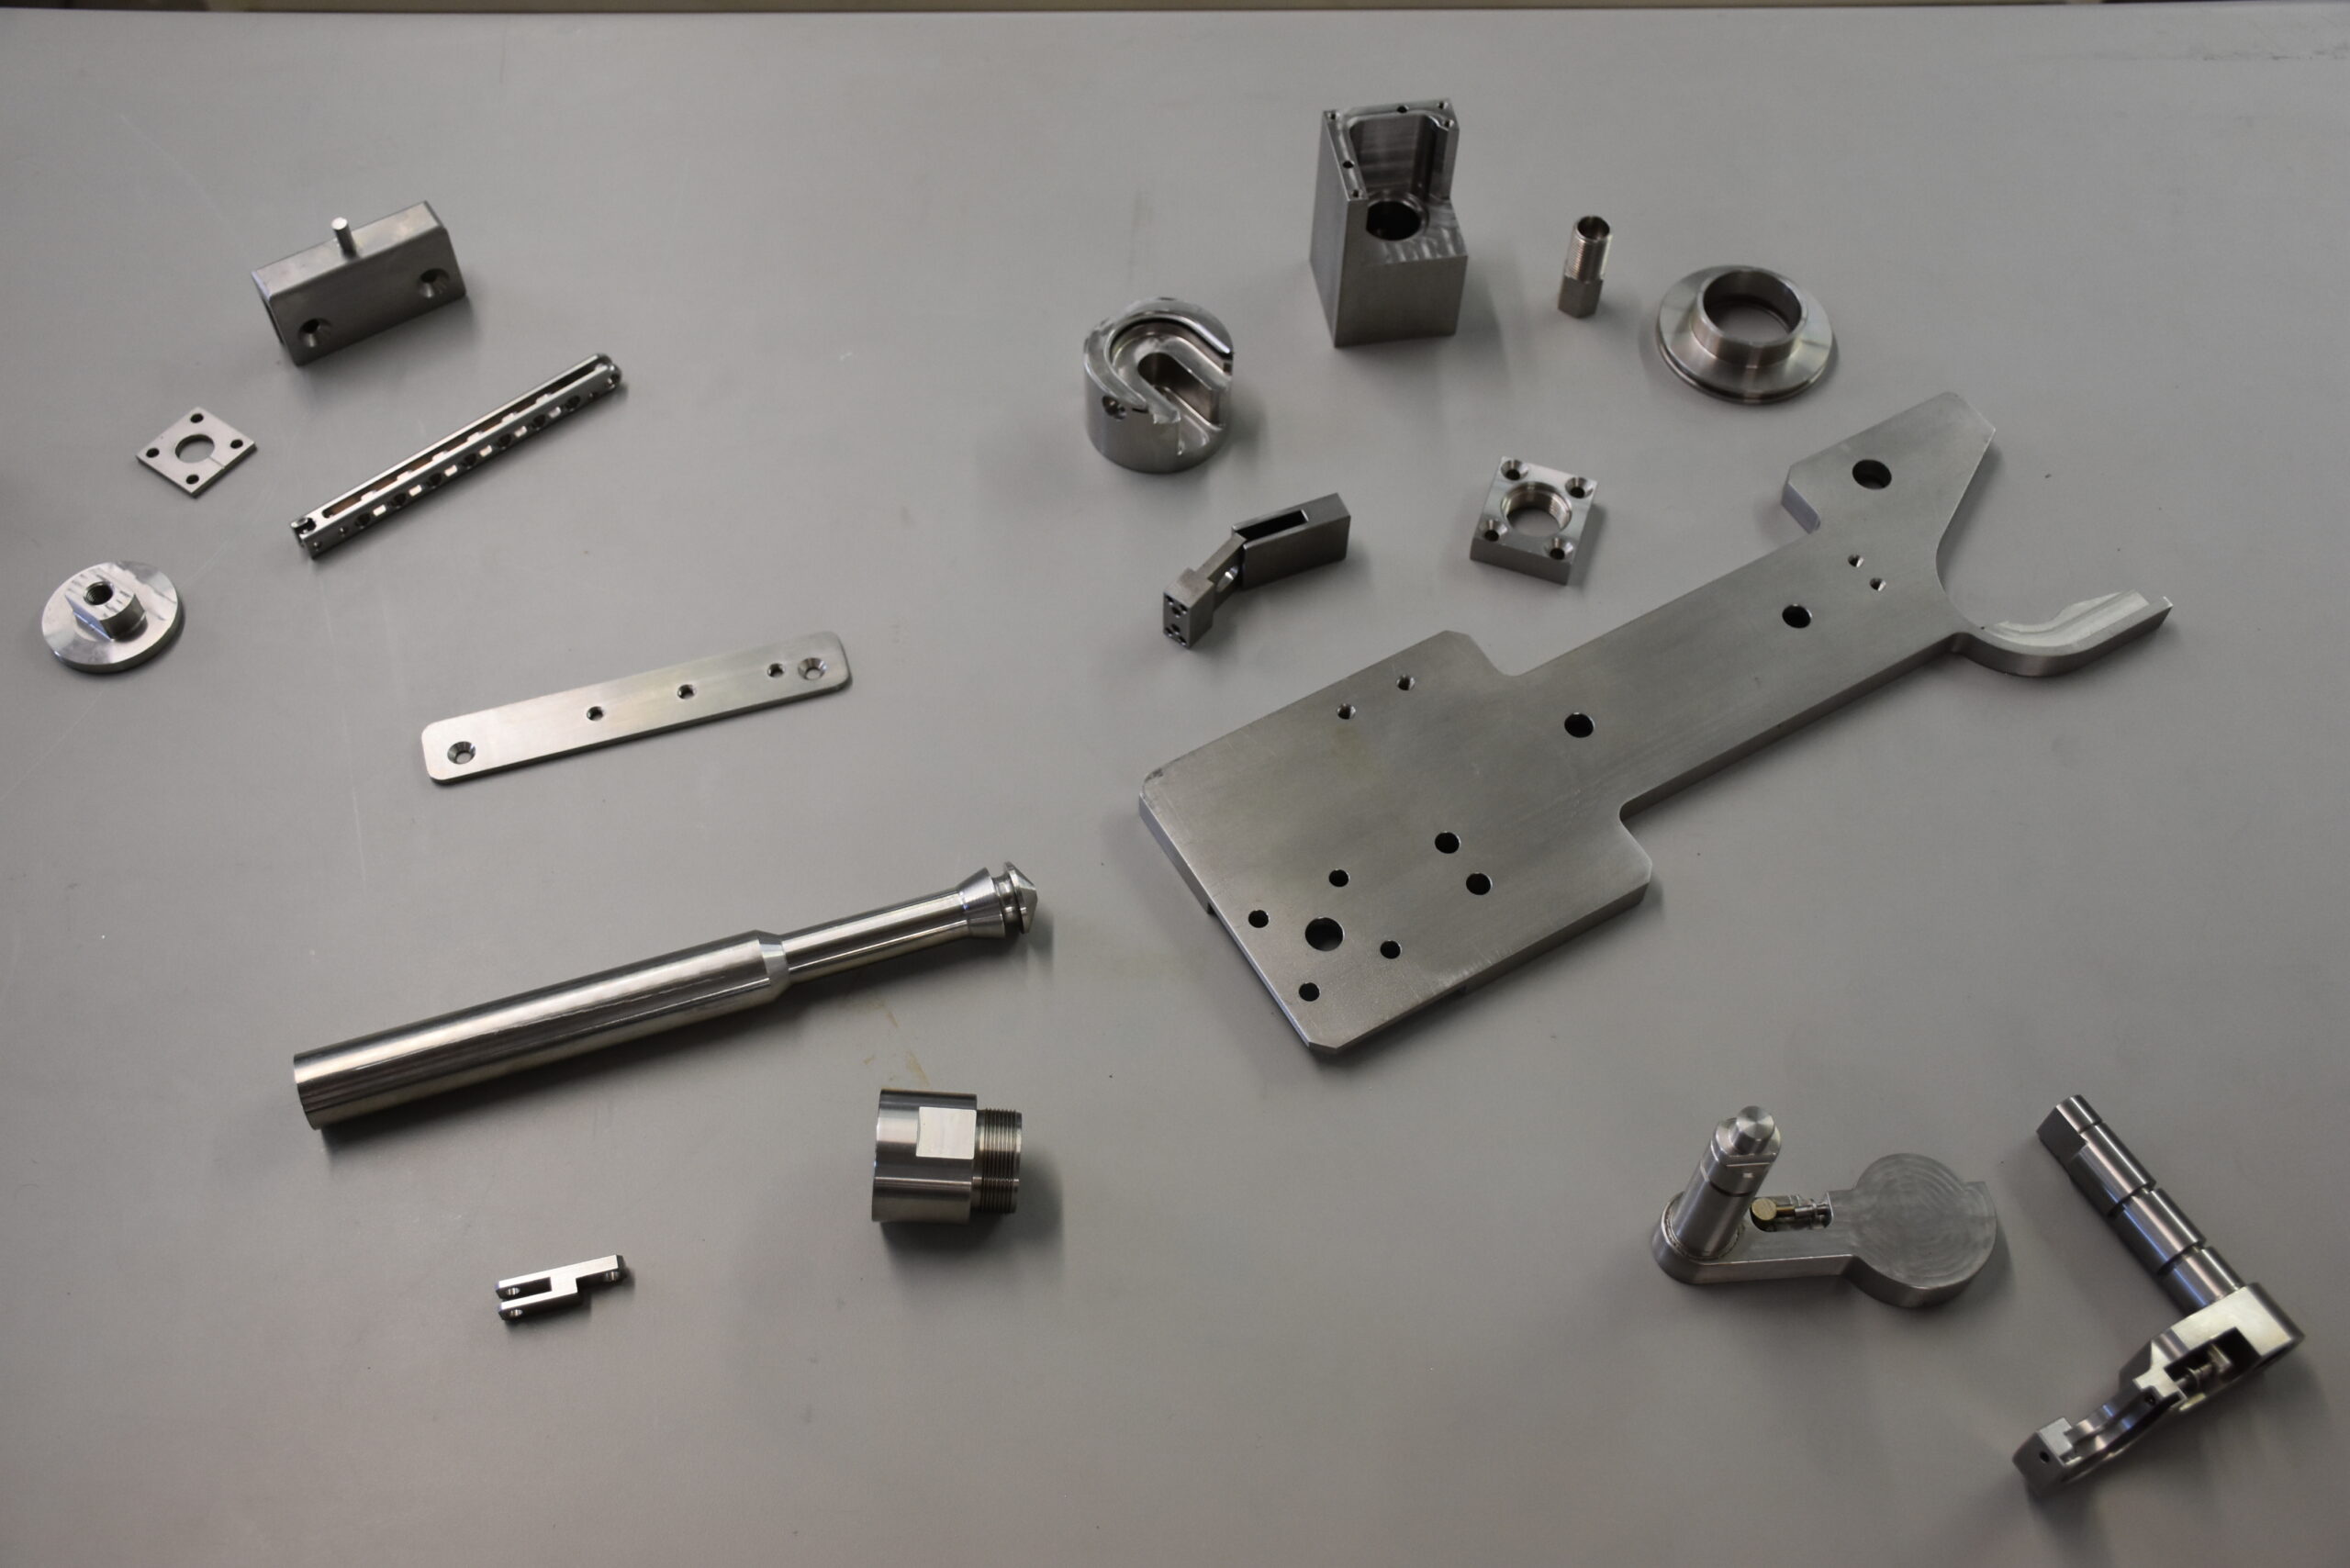 AJ Solution Machining: Your trusted partner for CNC machining in the Bay Area | Fremont CA